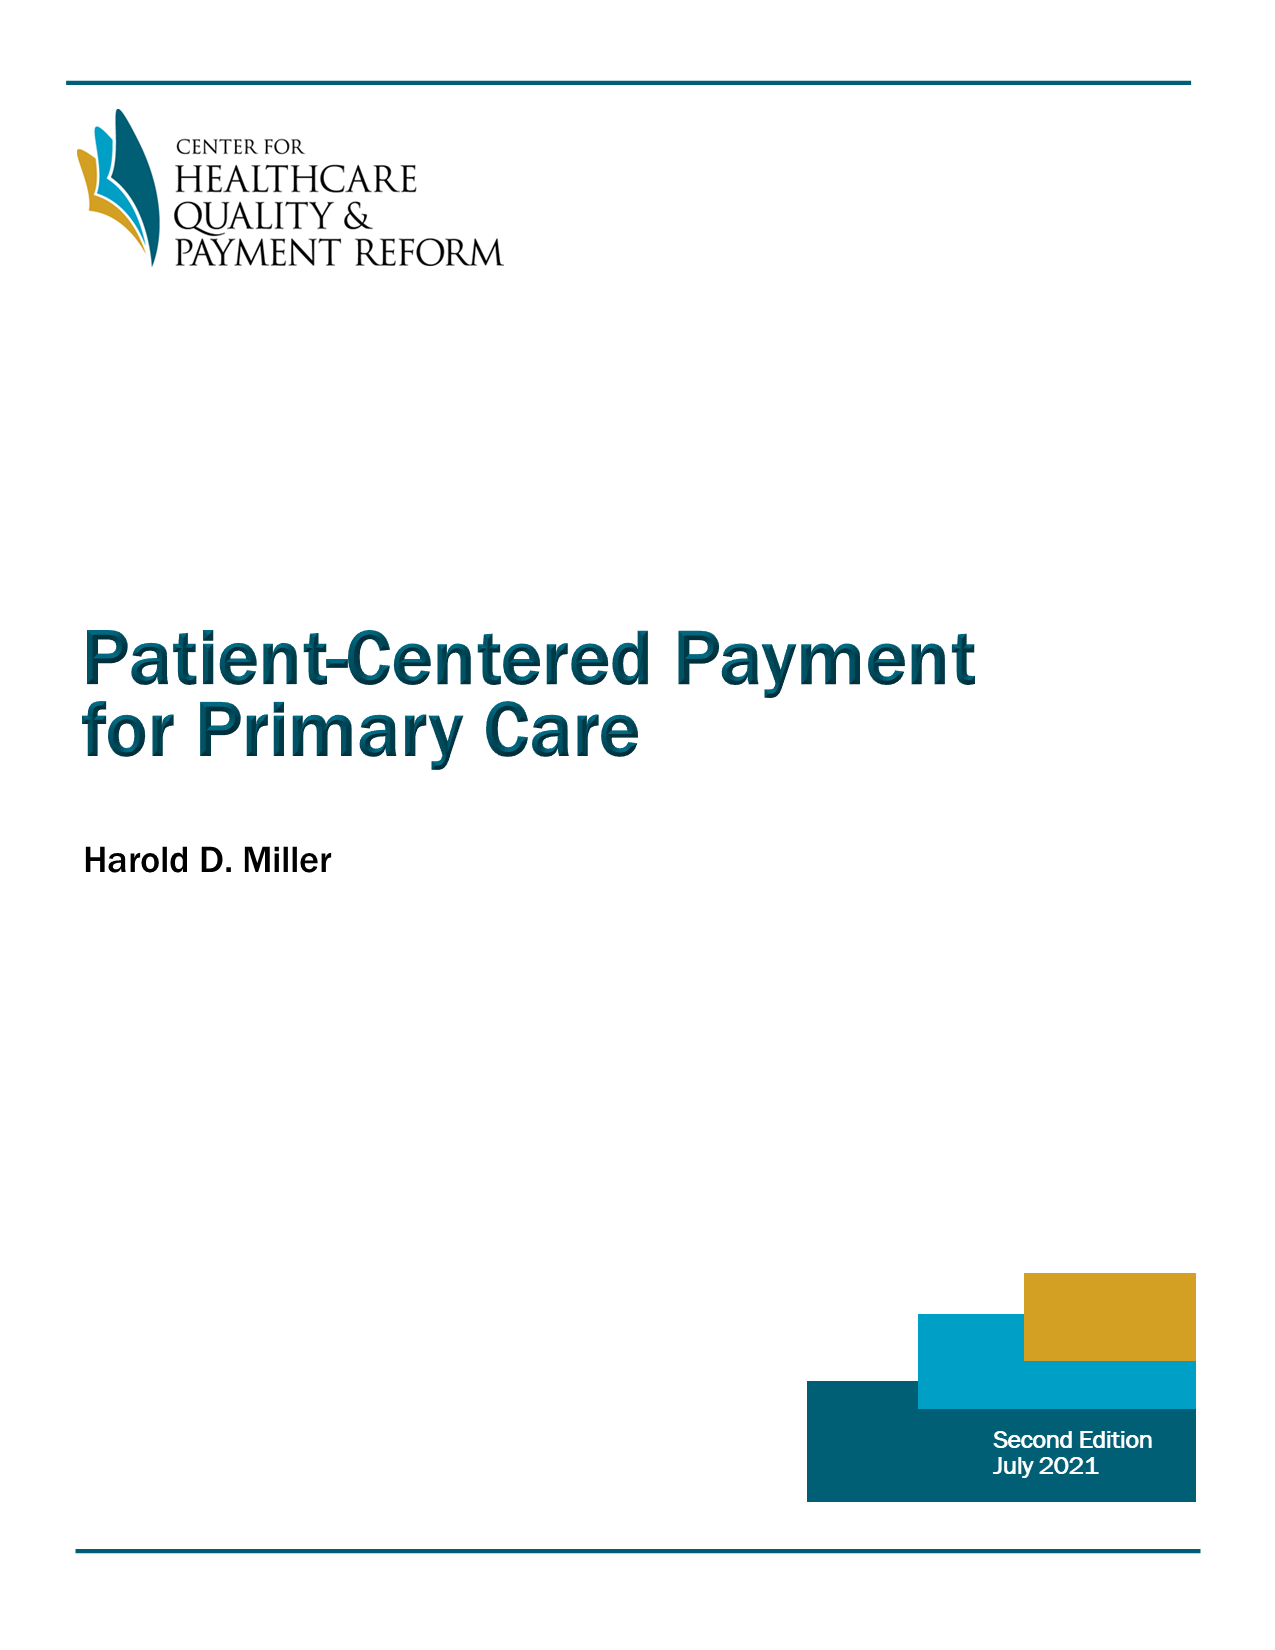 Patient-Centered Primary Care Report